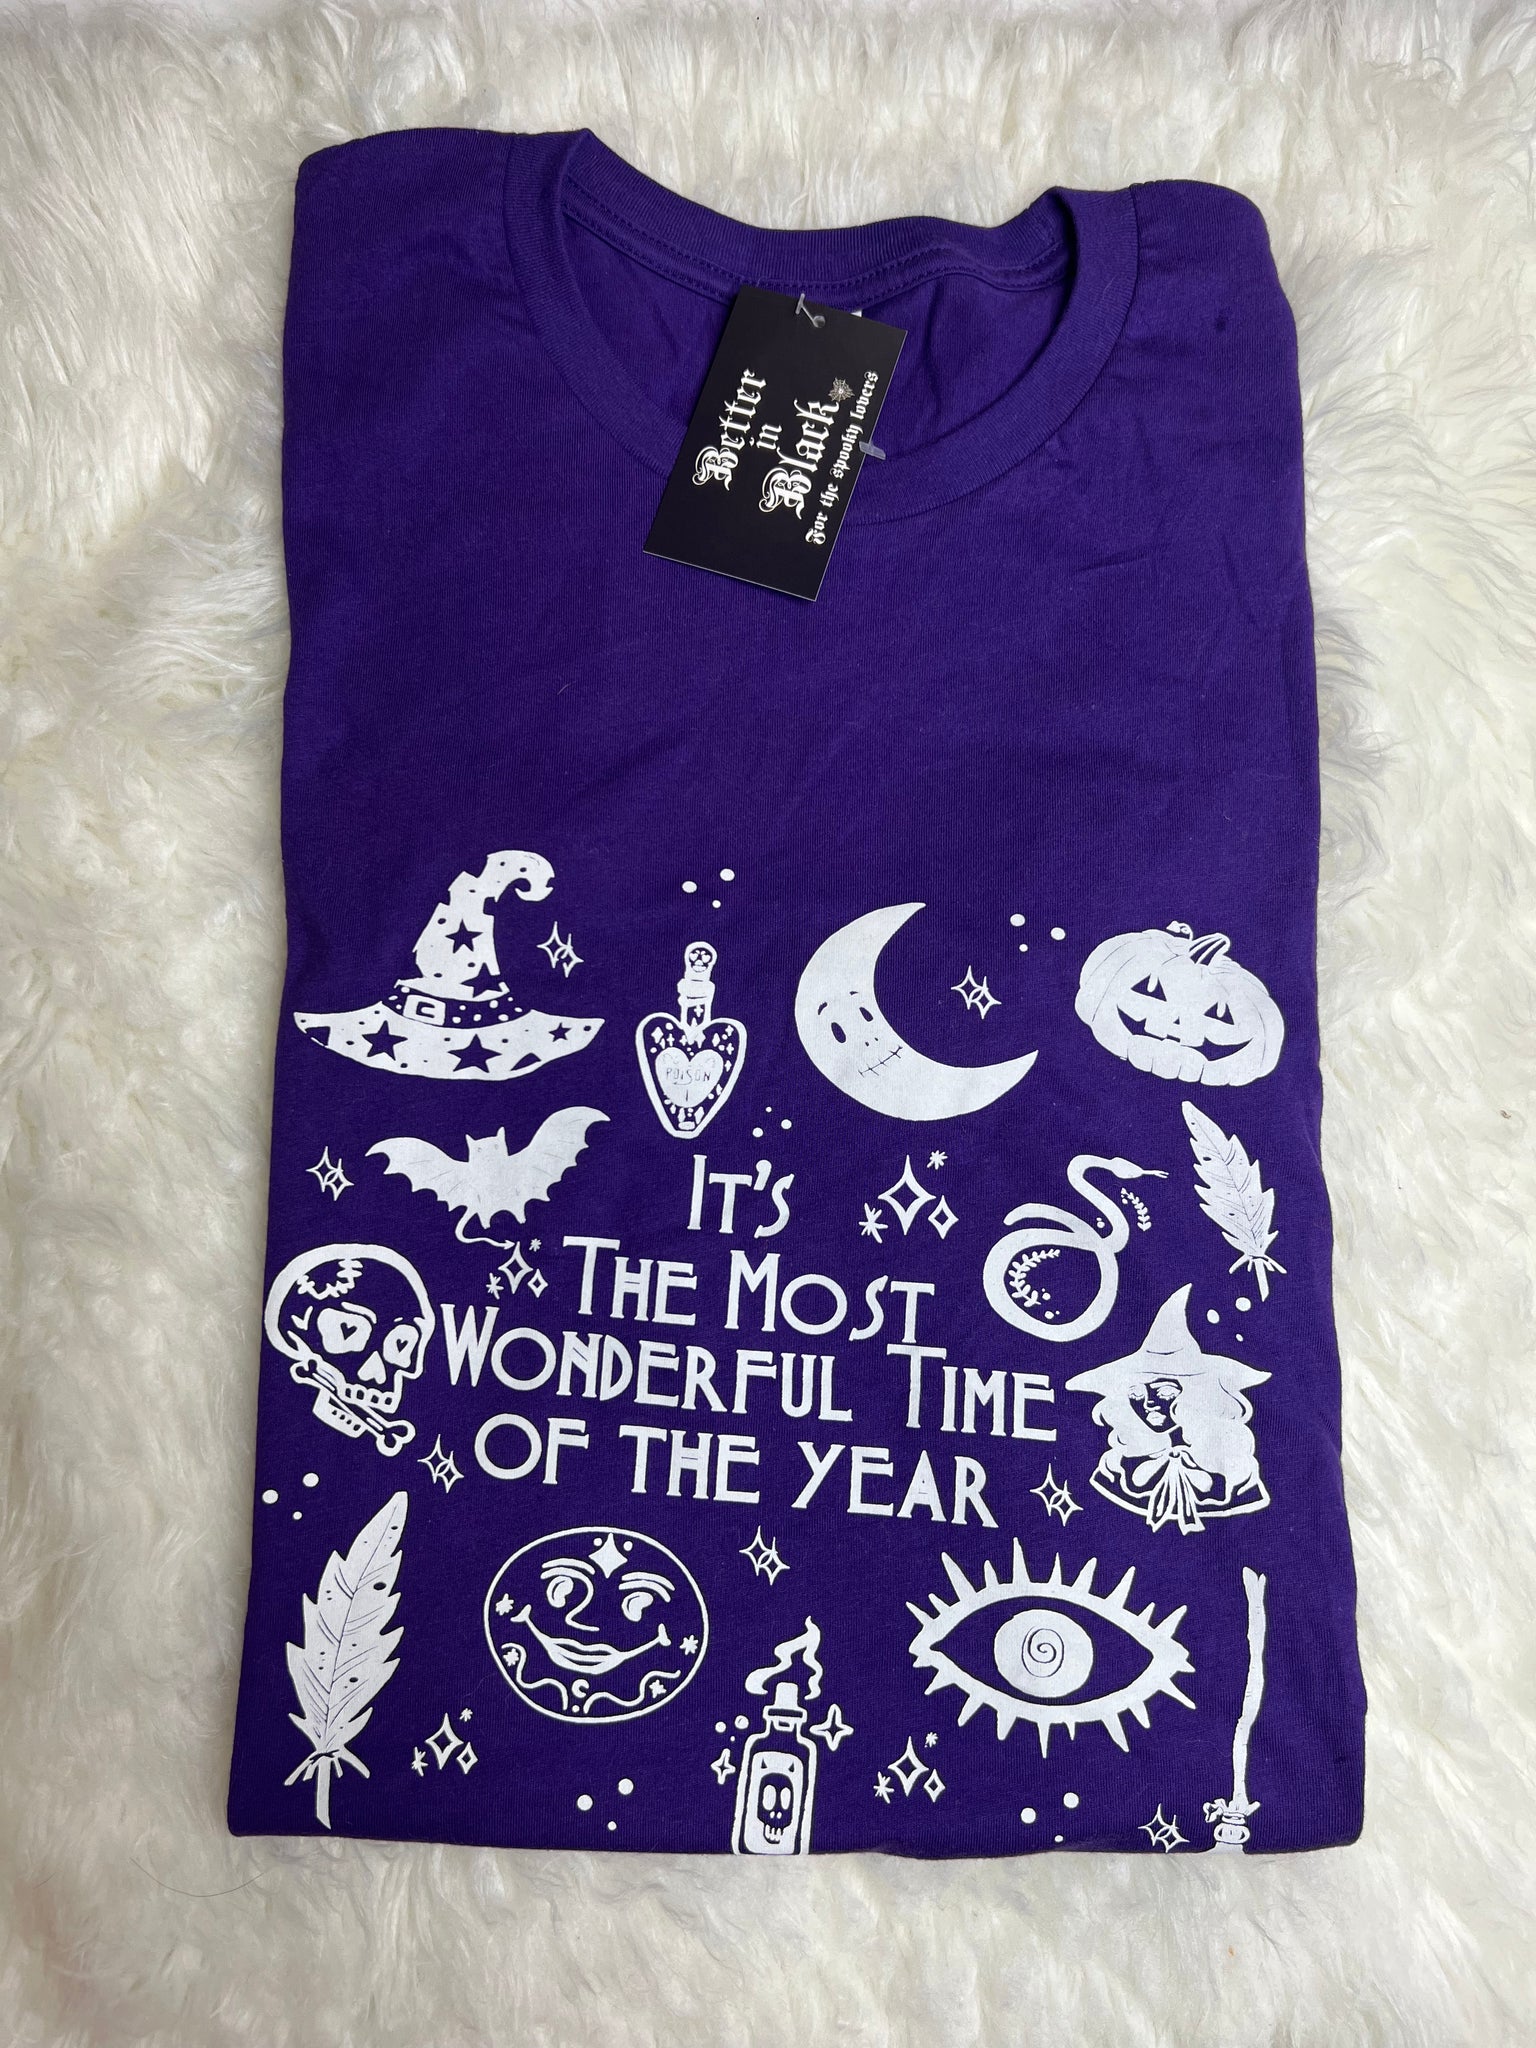 It’s the most wonderful time of the year — Purple Large Tee